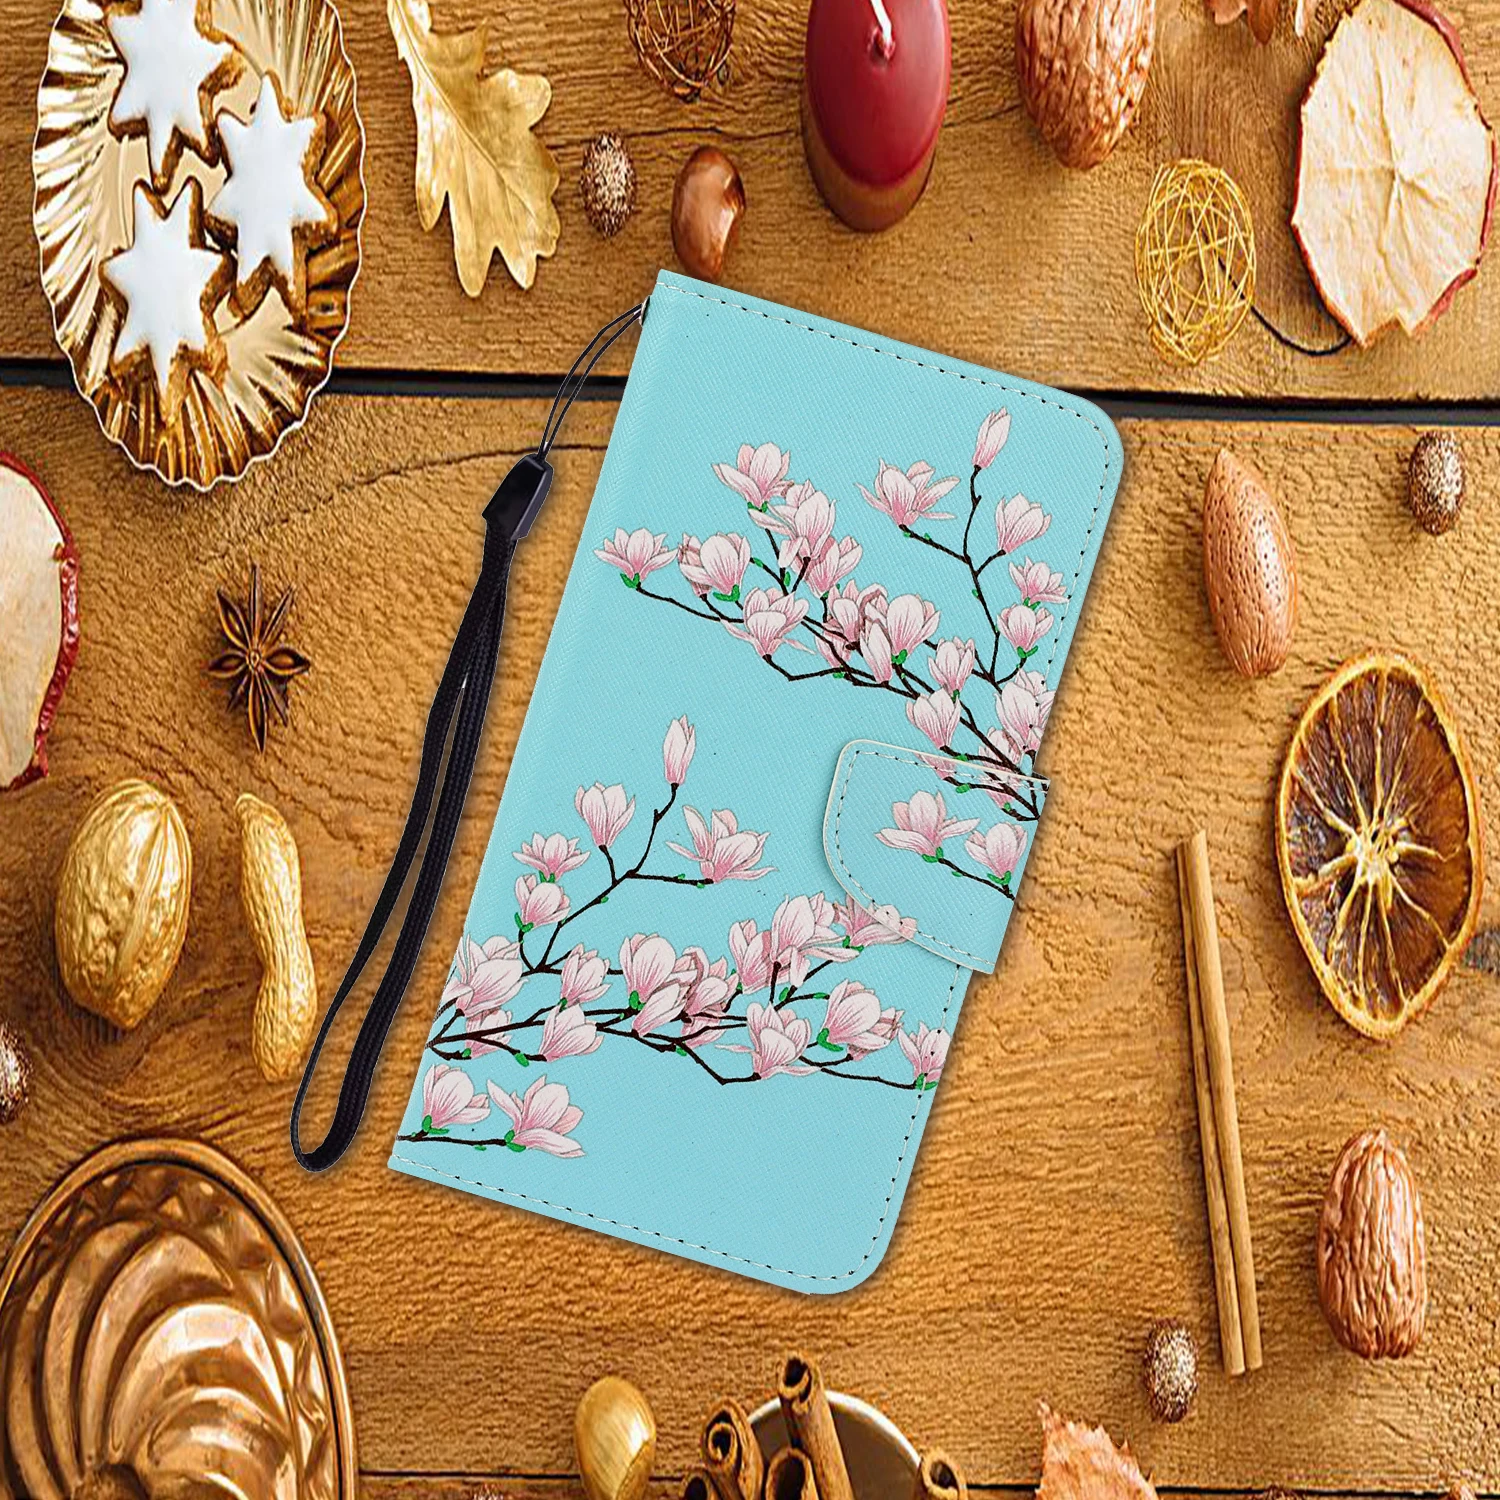 Flower Phone Case For Redmi Note 7A 8A 7 8 9 9S 9A 9C Pro Mi 10T Lite Flip Leather Wallet Card Slot Back Book Cover Fundas xiaomi leather case